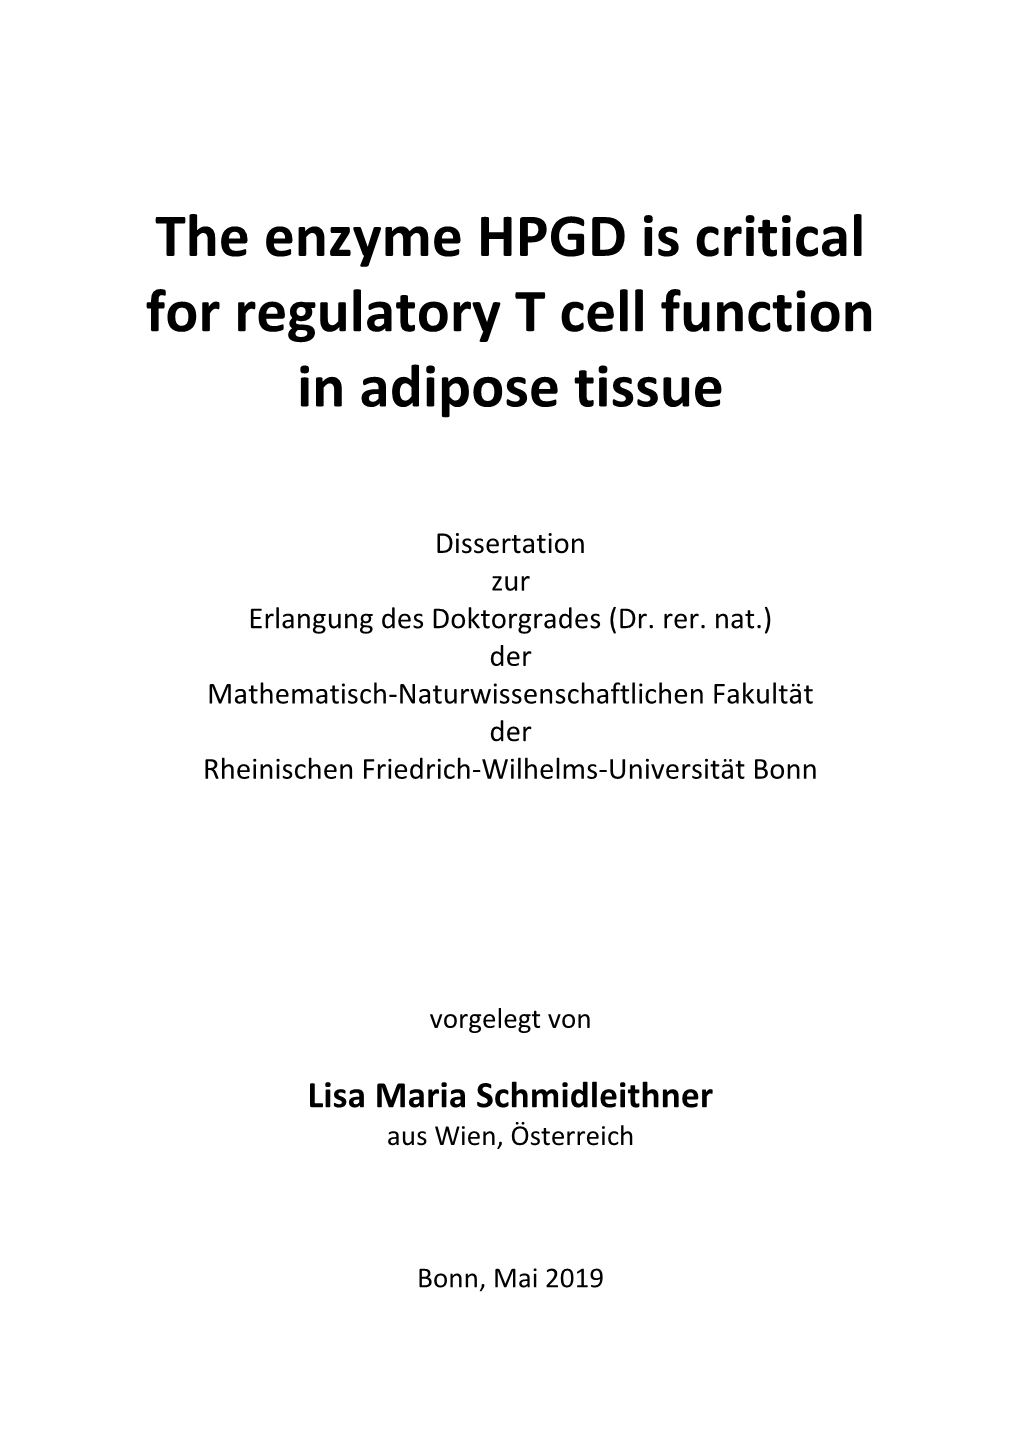 The Enzyme HPGD Is Critical for Regulatory T Cell Function in Adipose Tissue